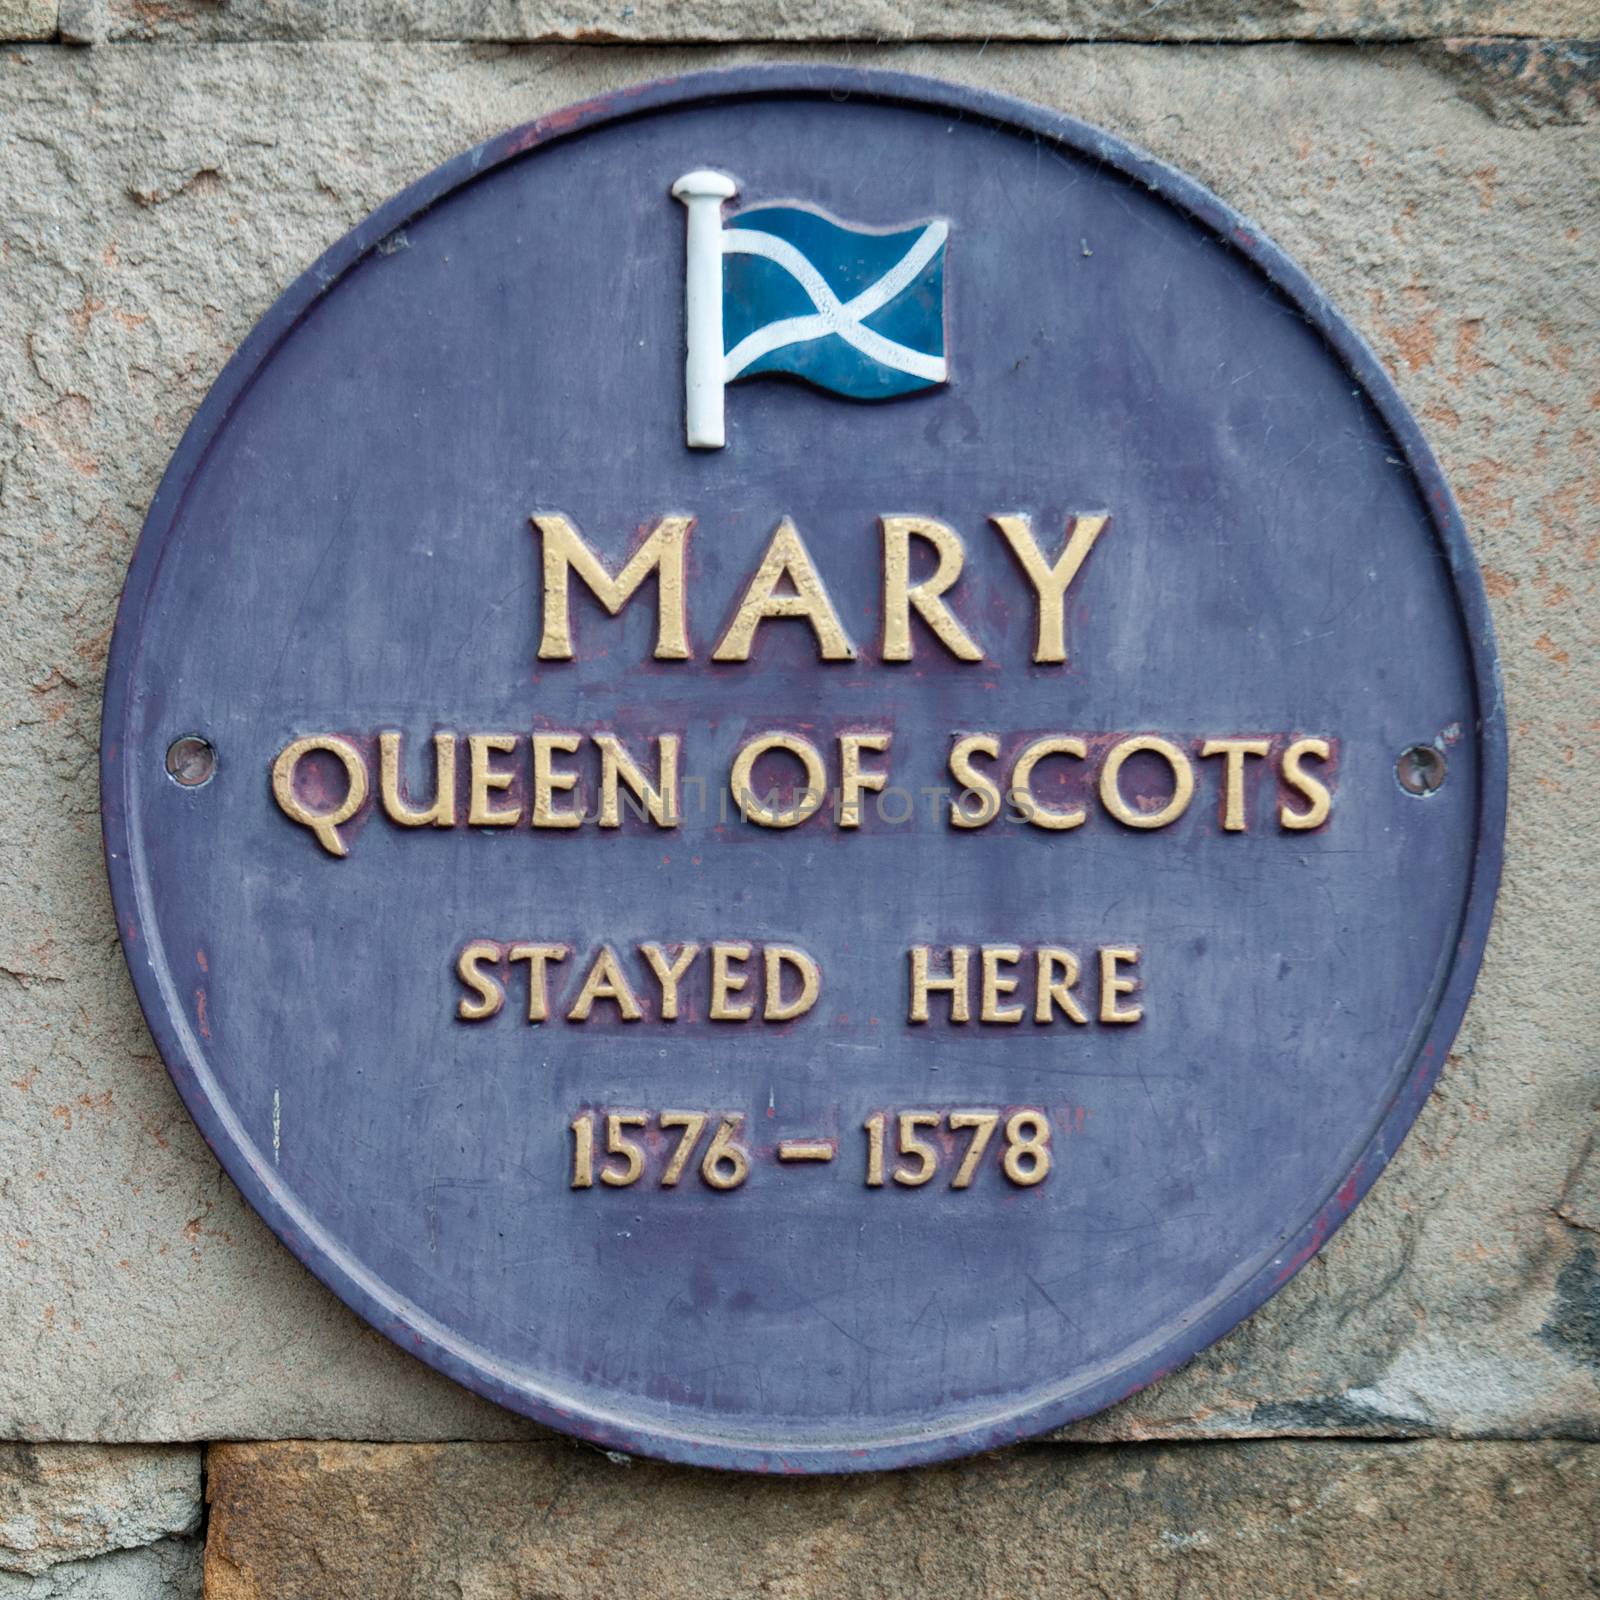 Plaque to commemorate Mary Queen of Scots stay in Buxton